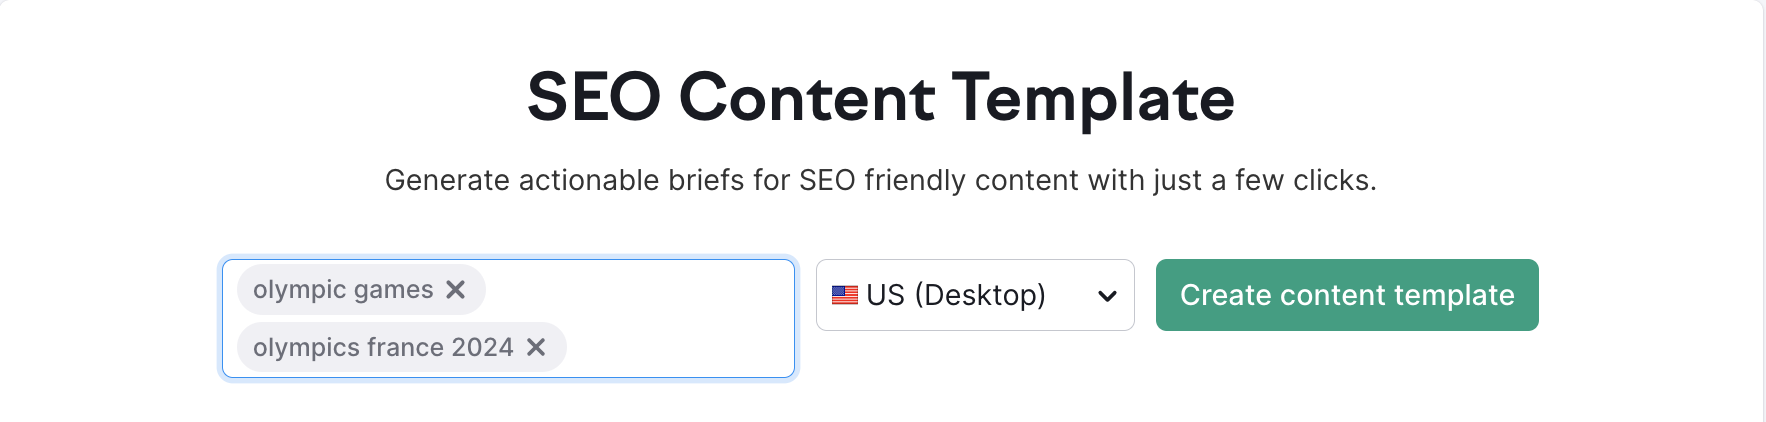 SEO content template